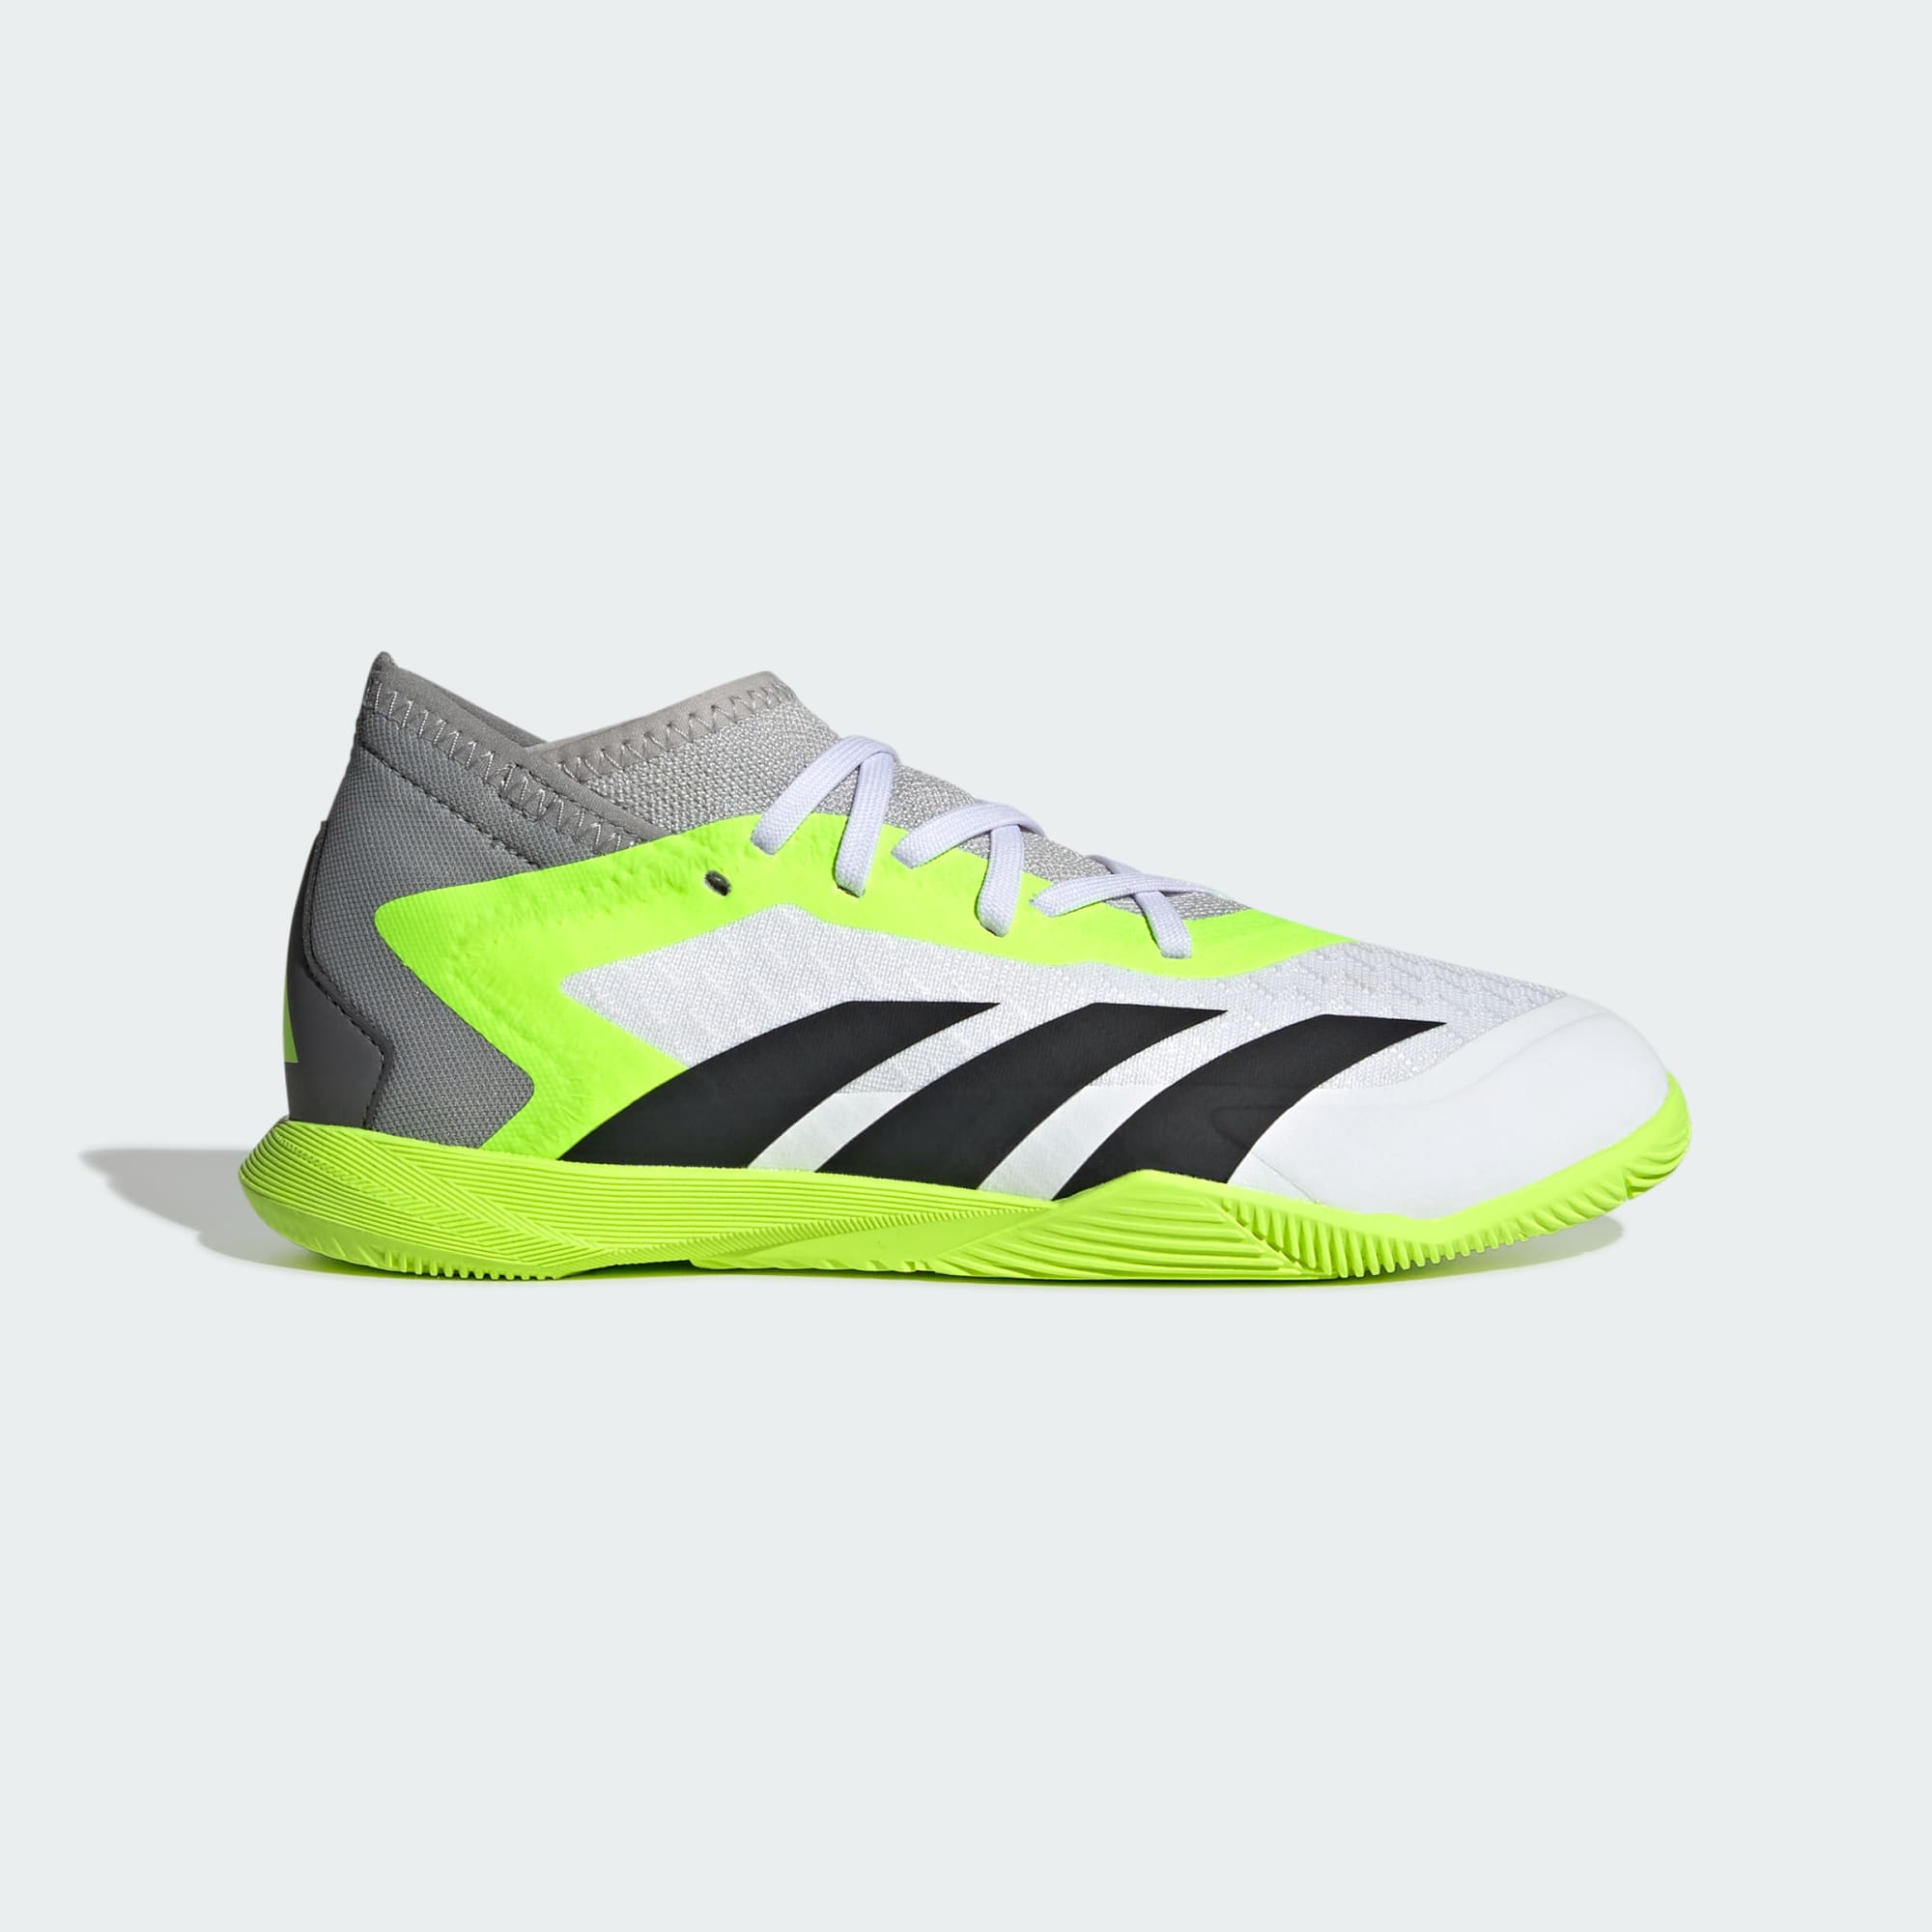 adidas PREDATOR ACCURACY.3 INDOOR SOCCER SHOES YOUTH